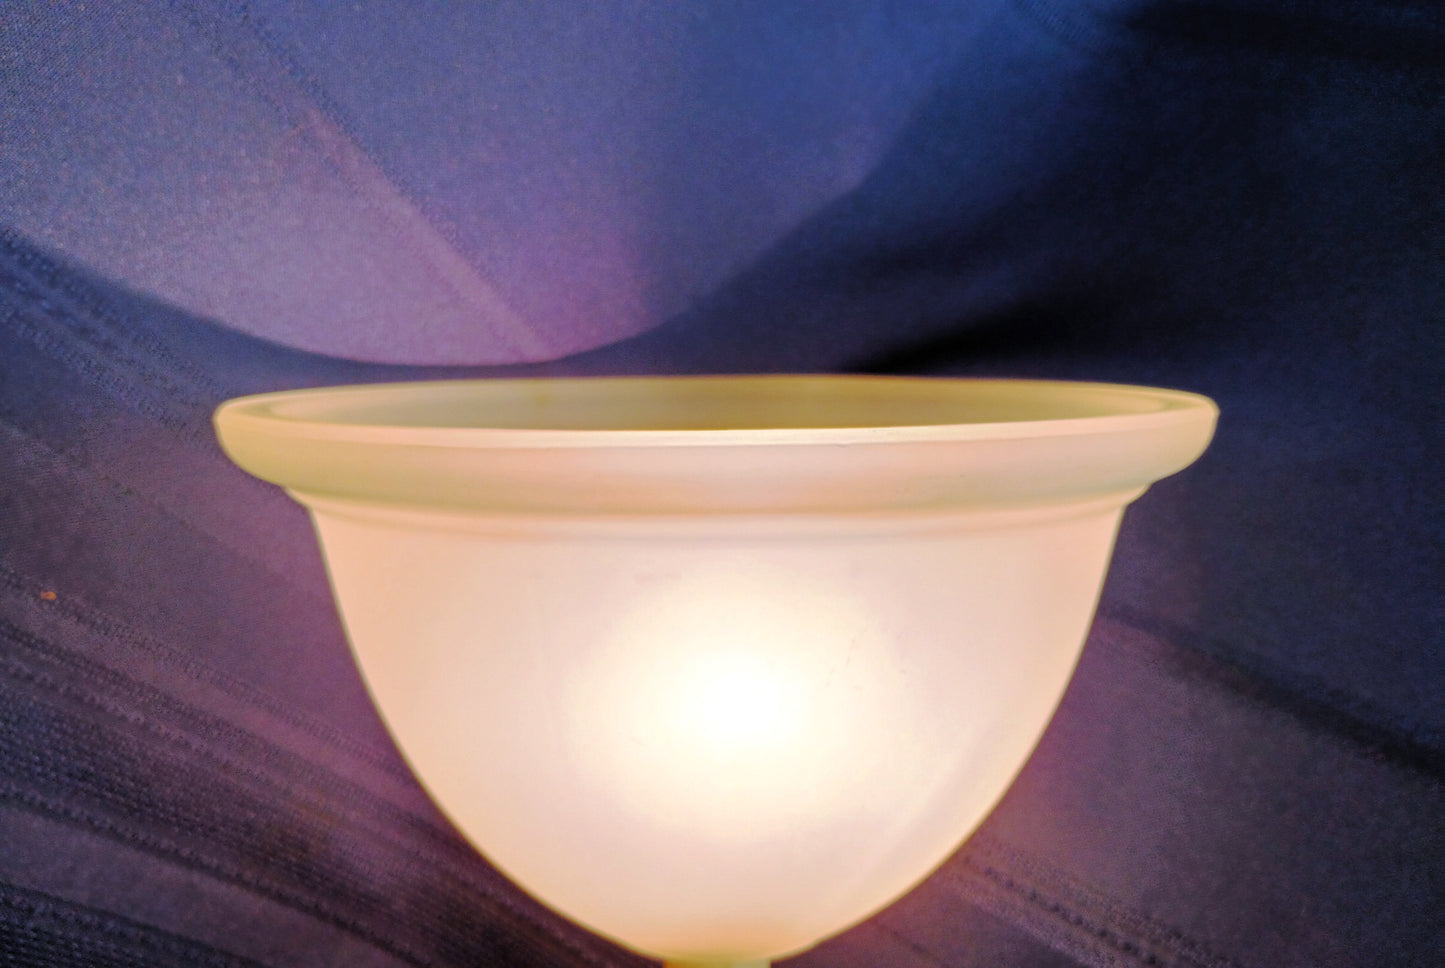 Vintage Replacement Lampshade Cone Shape Satin White Heavy Glass Small Light Diffuser Torchiere Style 7.5 D Top Lipless with 1-5/8” Fitter Opening